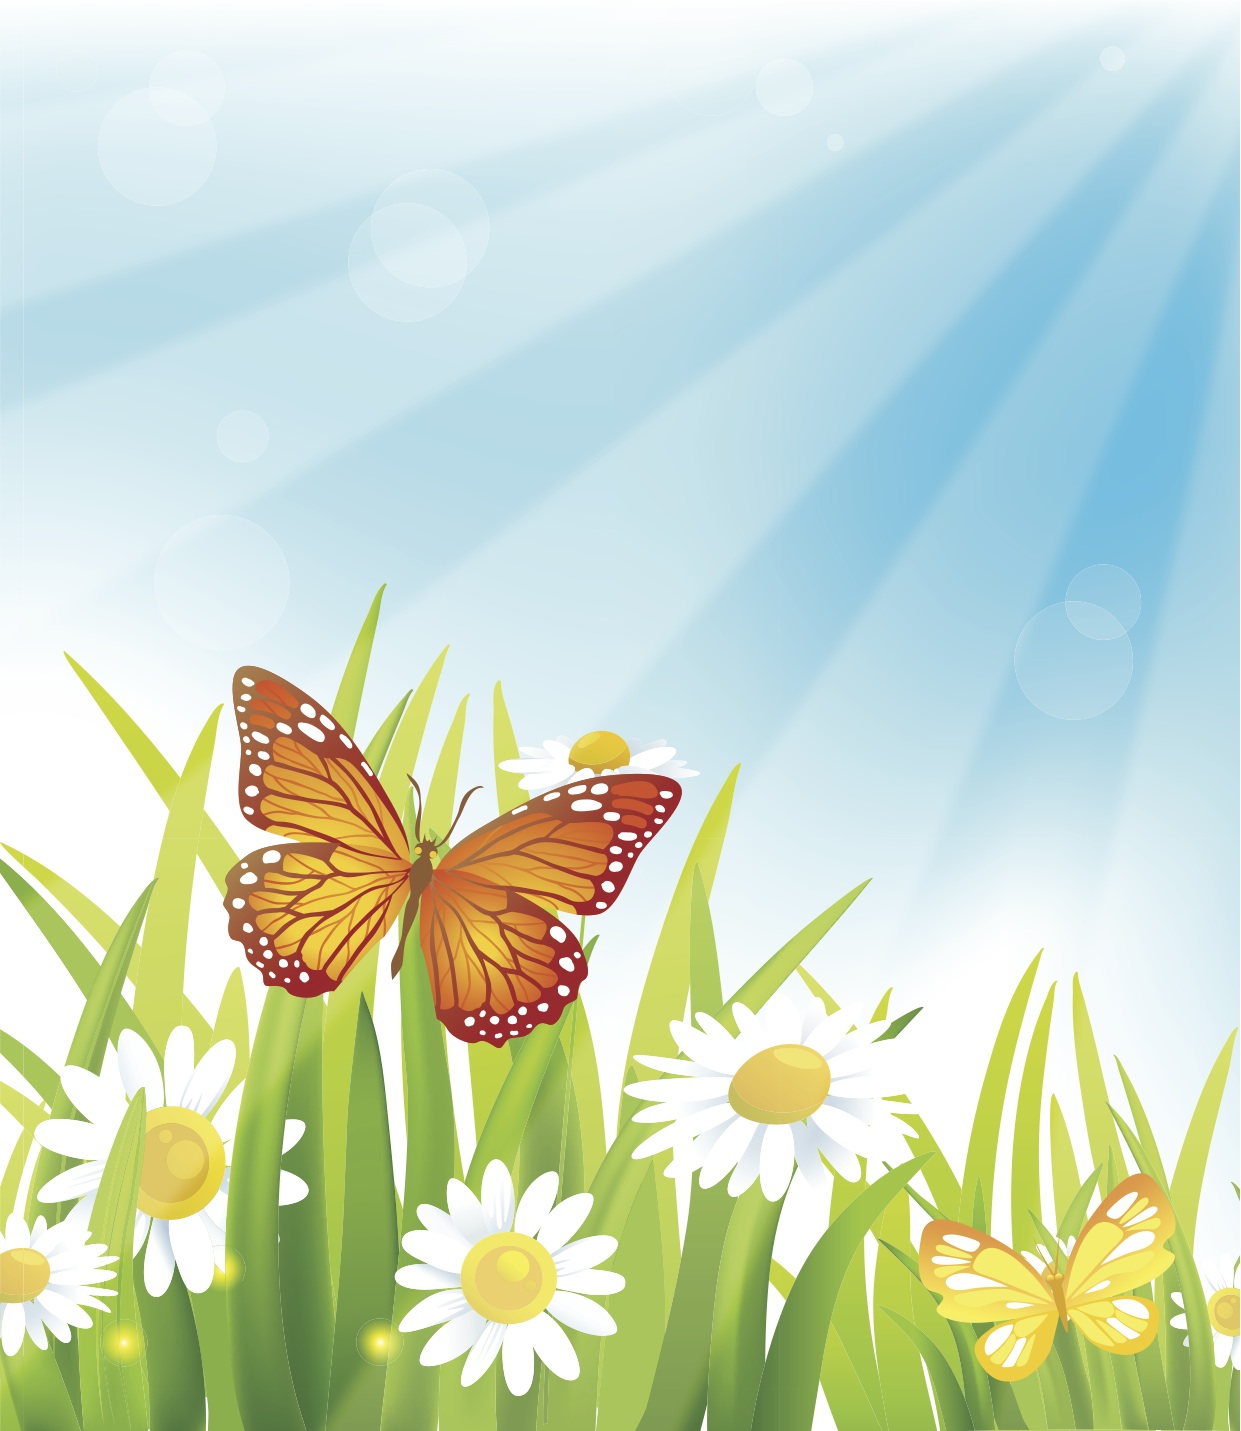 Butterfly Summer Vector Background Vector Art & Graphics | freevector.com